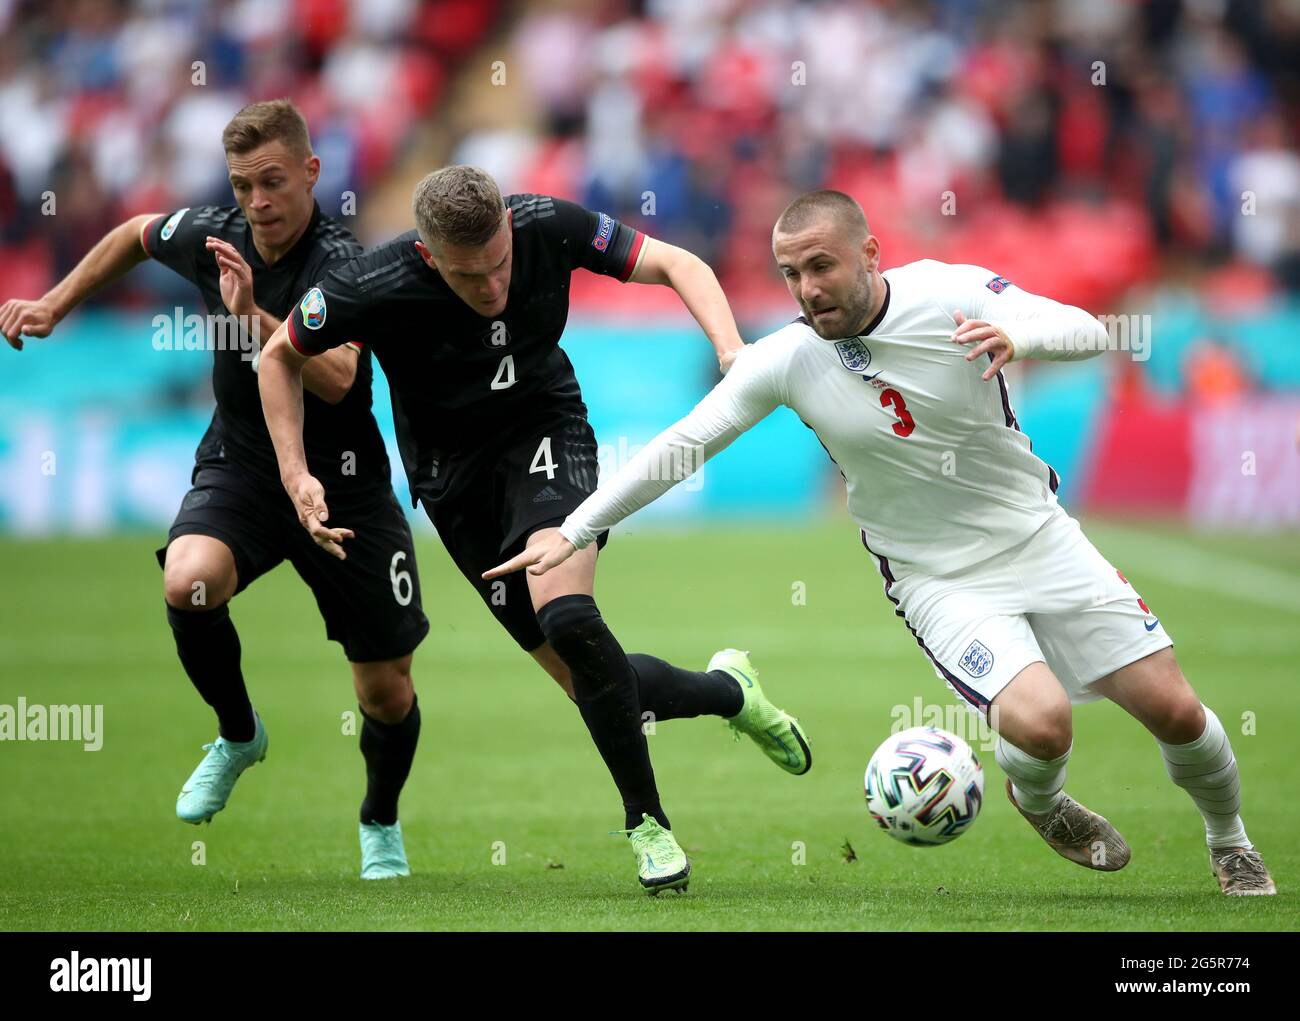 England's Luke Shaw (right) and Germany's Matthias Ginter battle for the ball during the UEFA Euro 2020 round of 16 match at Wembley Stadium, London. Picture date: Tuesday June 29, 2021. Stock Photo